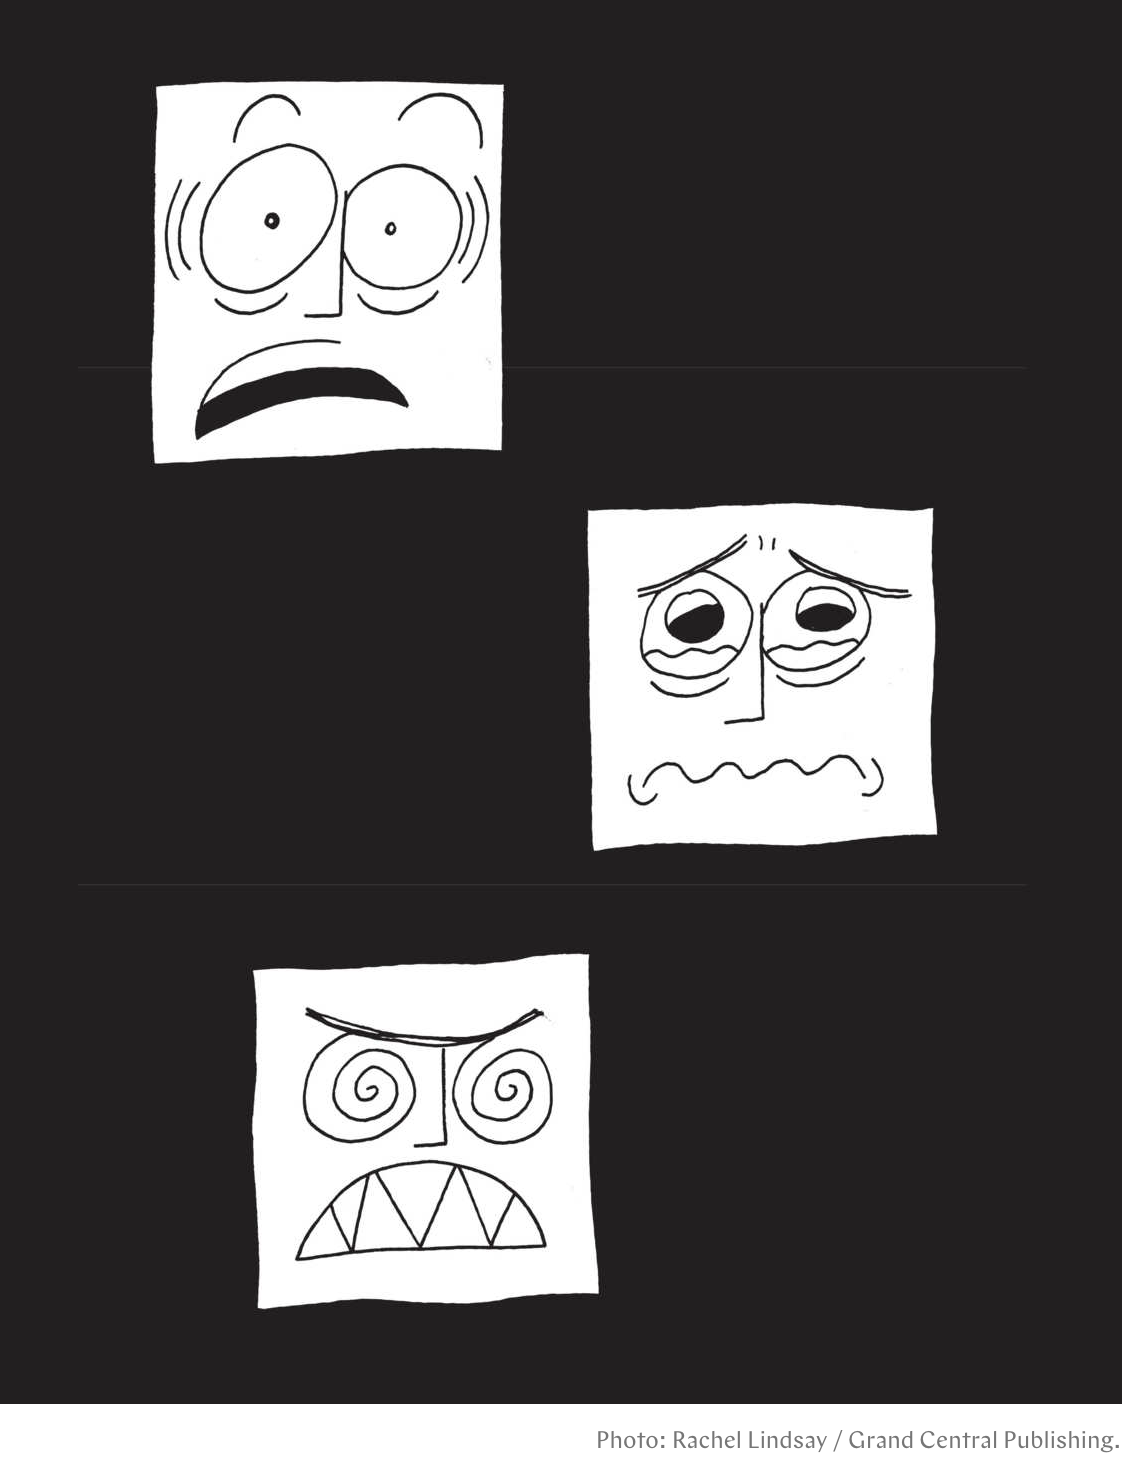 Cartoon image by Rachel Lindsay that appeared in The Cut magazine article. Three cartoon faces decpicting different emotions